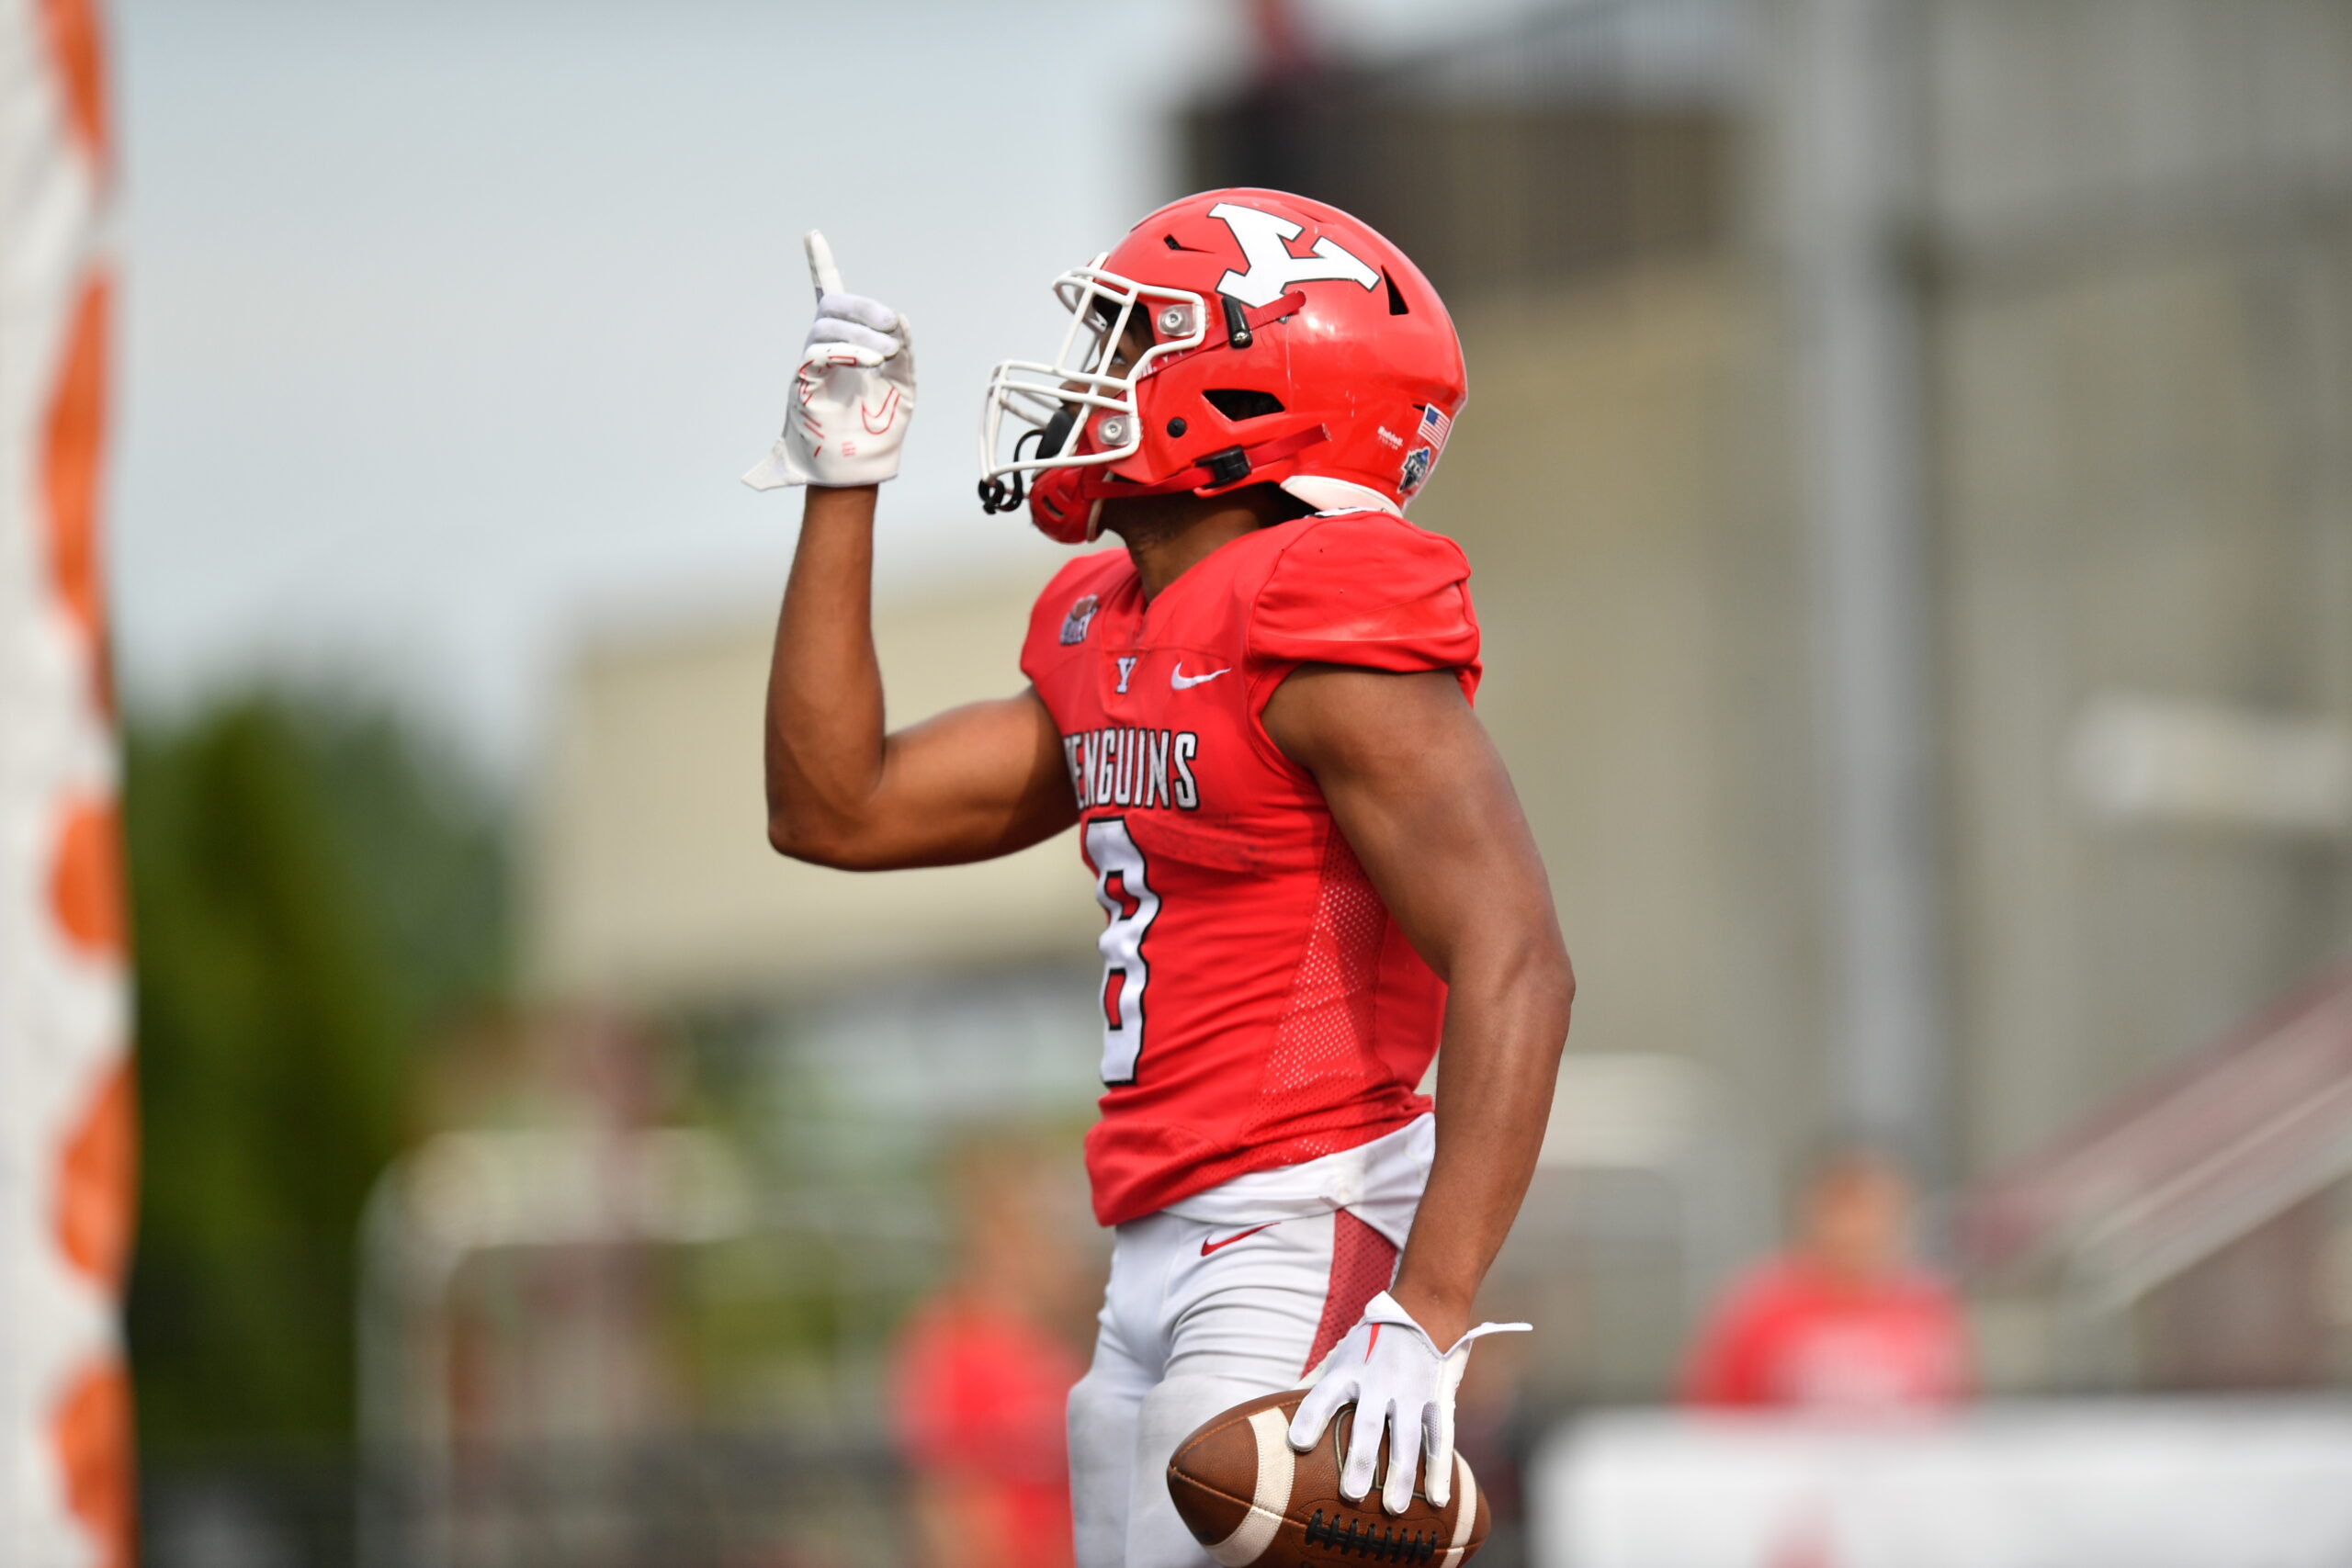 Jaleel McLaughlin is about to play his final football game as a member of the Youngstown State University Penguins. Photo credit: Youngstown State University Sports Information